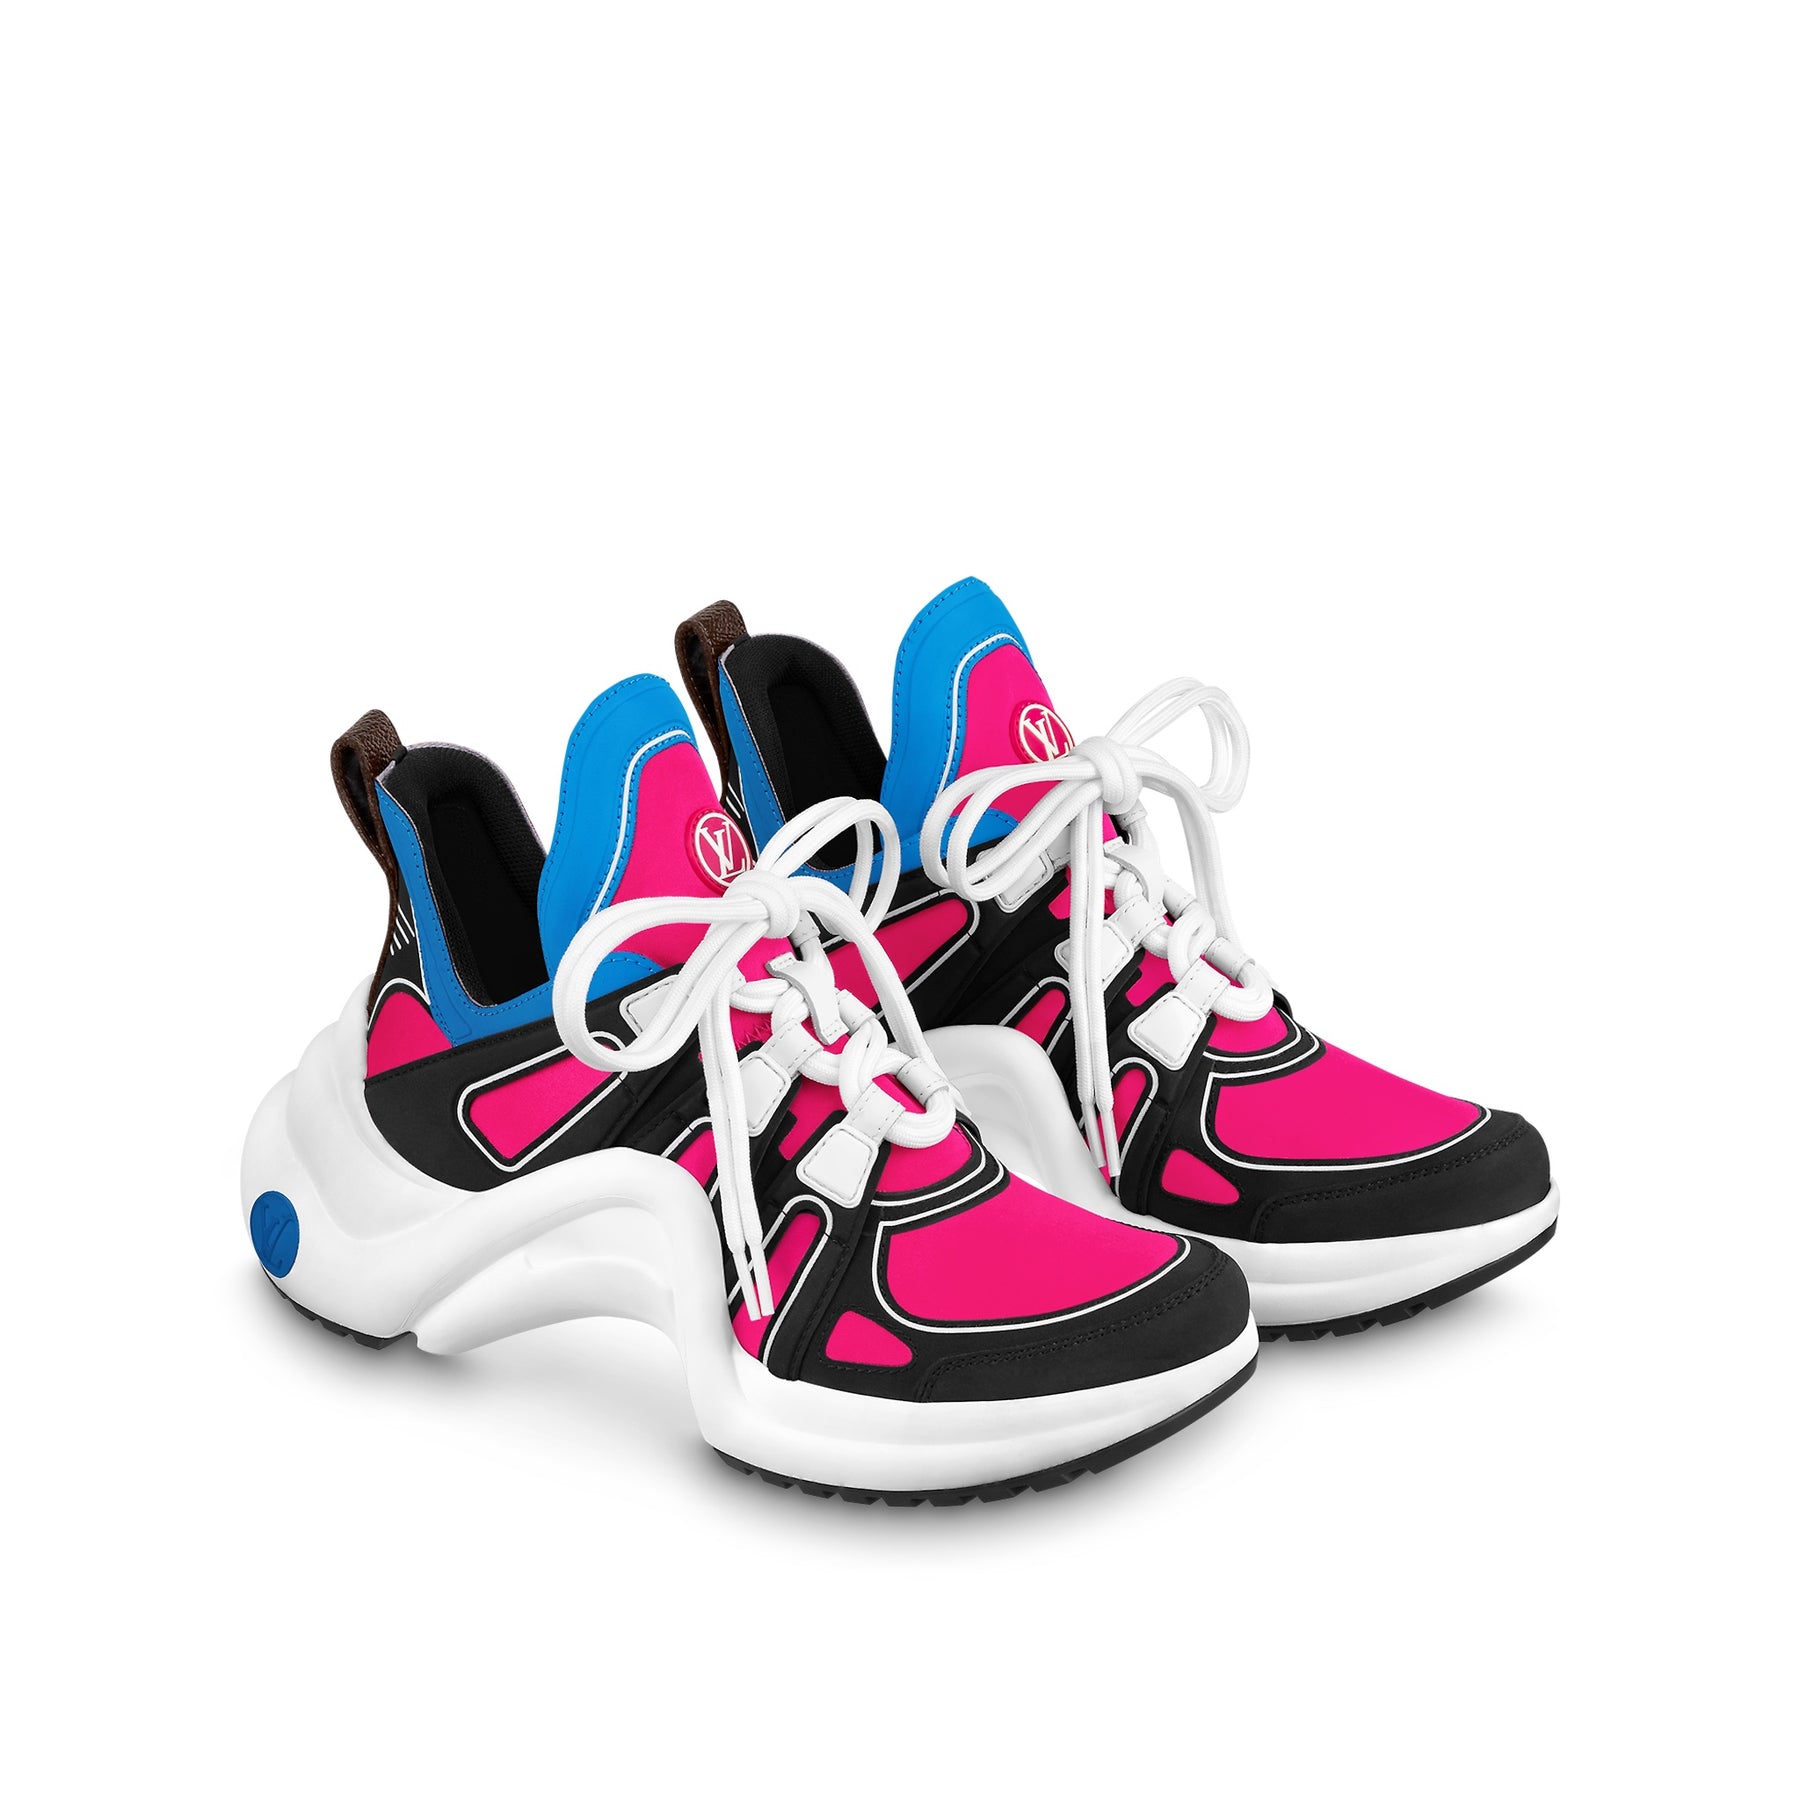 Louis Vuitton Archlight Sneakers in Pink & Gold